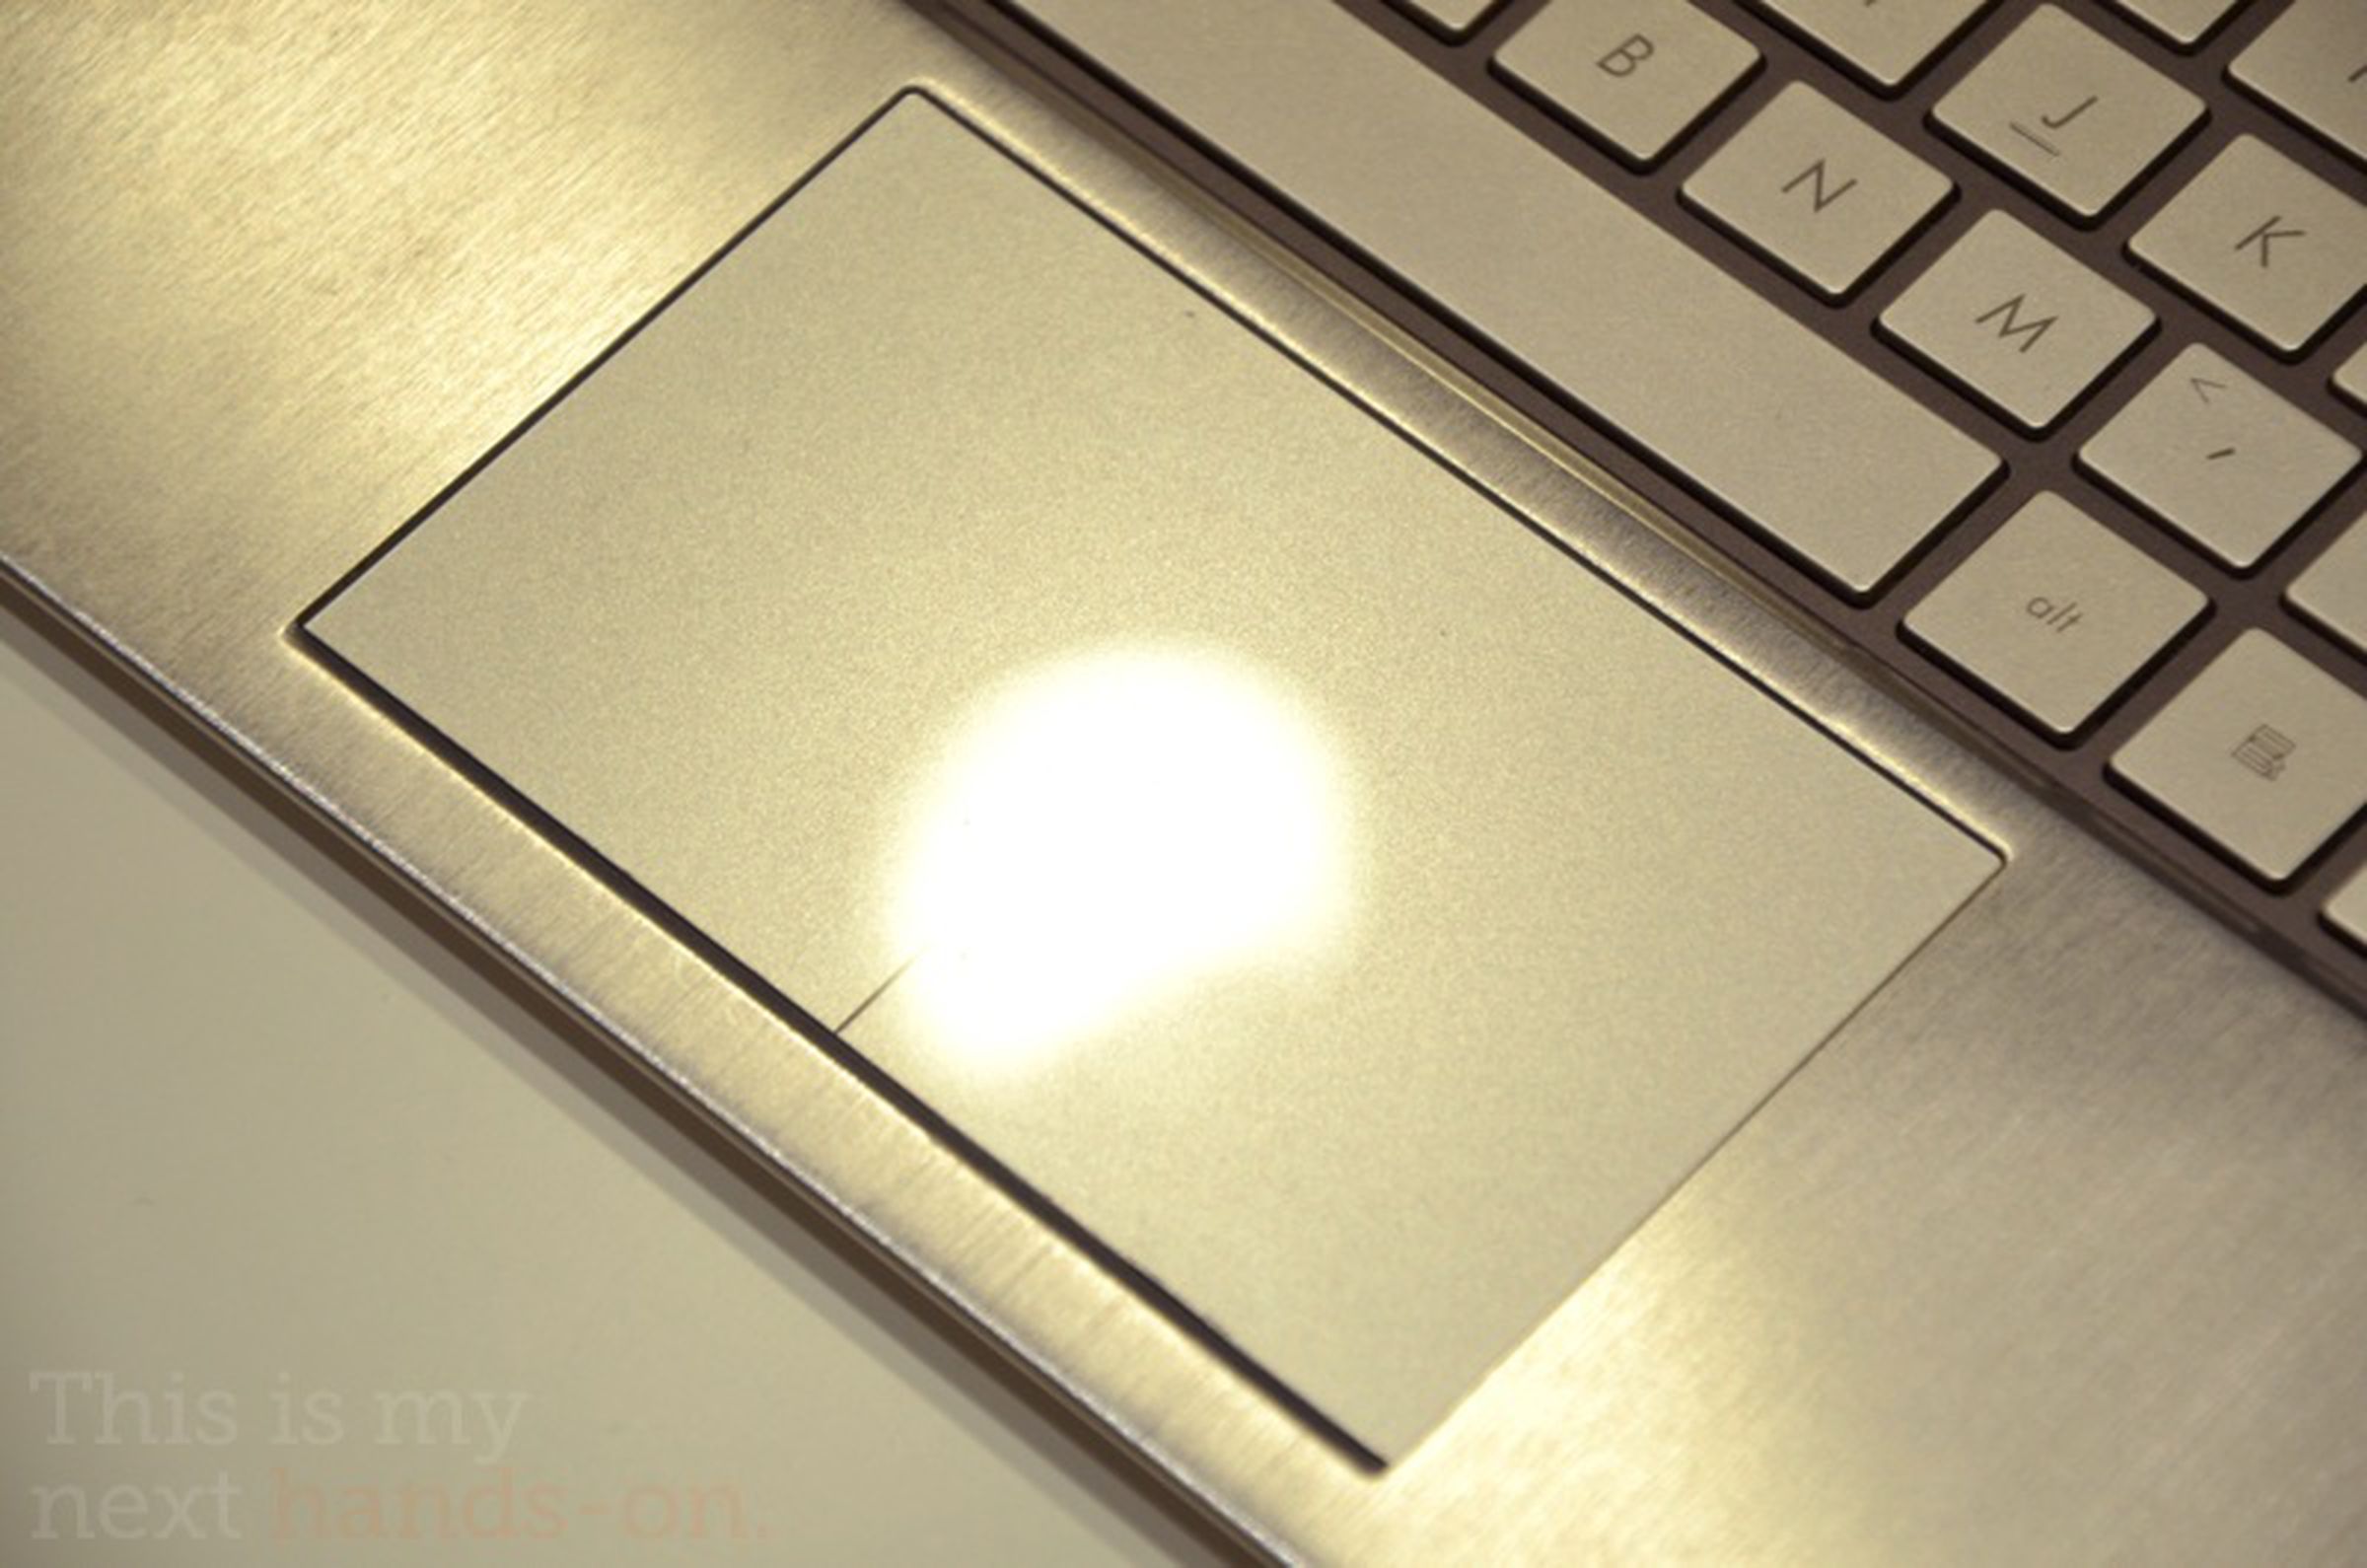 ASUS UX21 ultrabook hands-on, plus 13.3-inch UX31 confirmation 